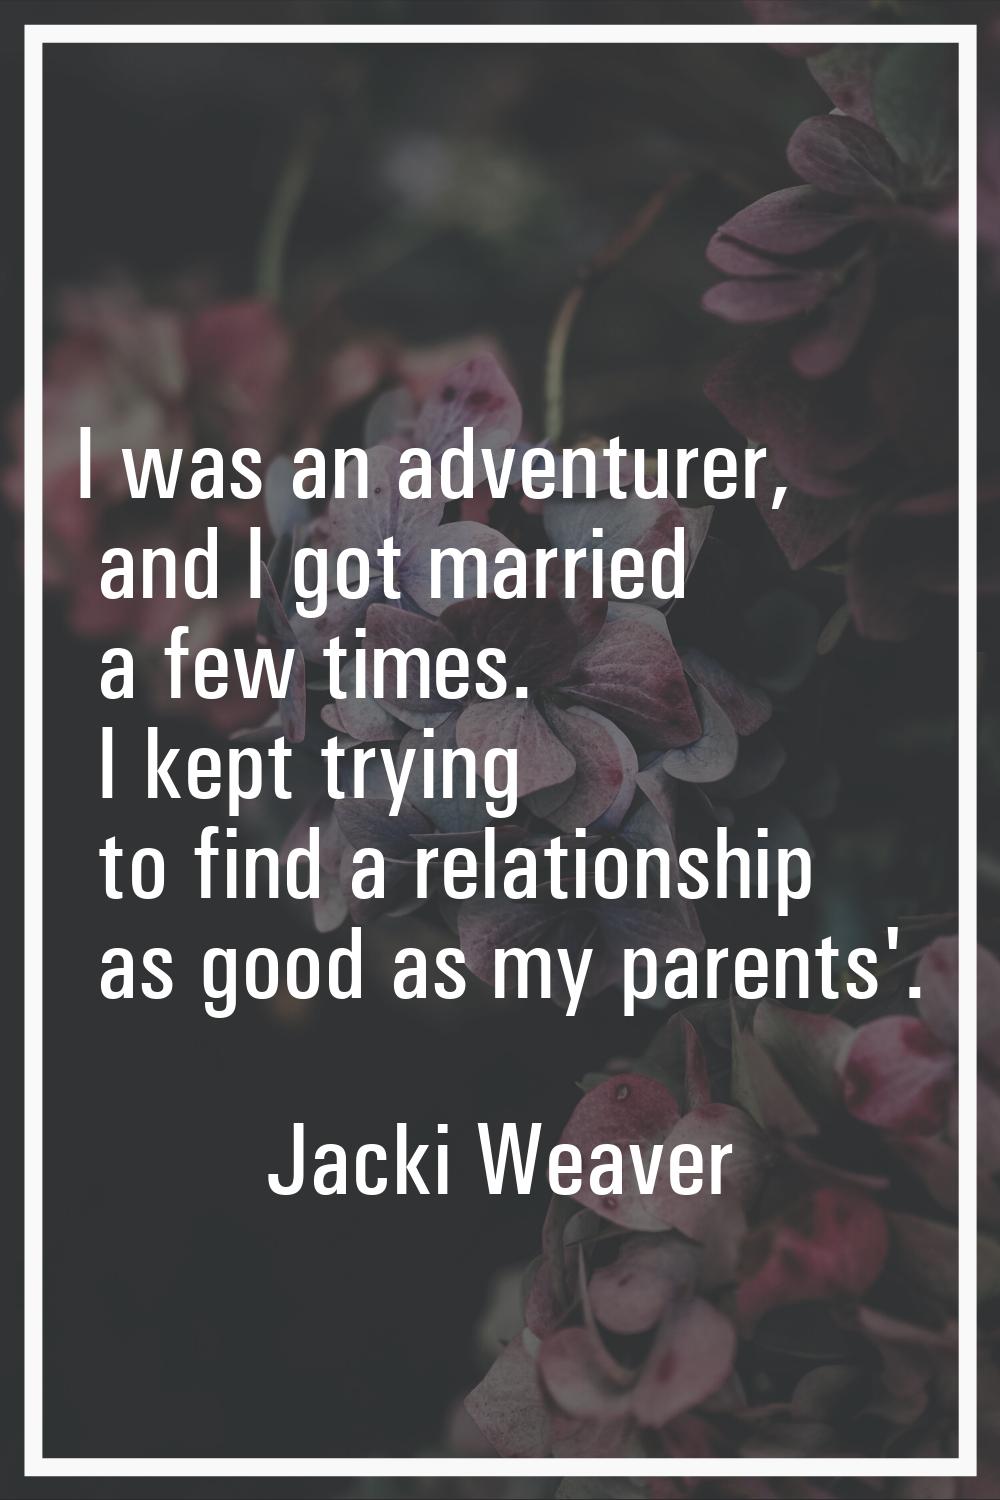 I was an adventurer, and I got married a few times. I kept trying to find a relationship as good as